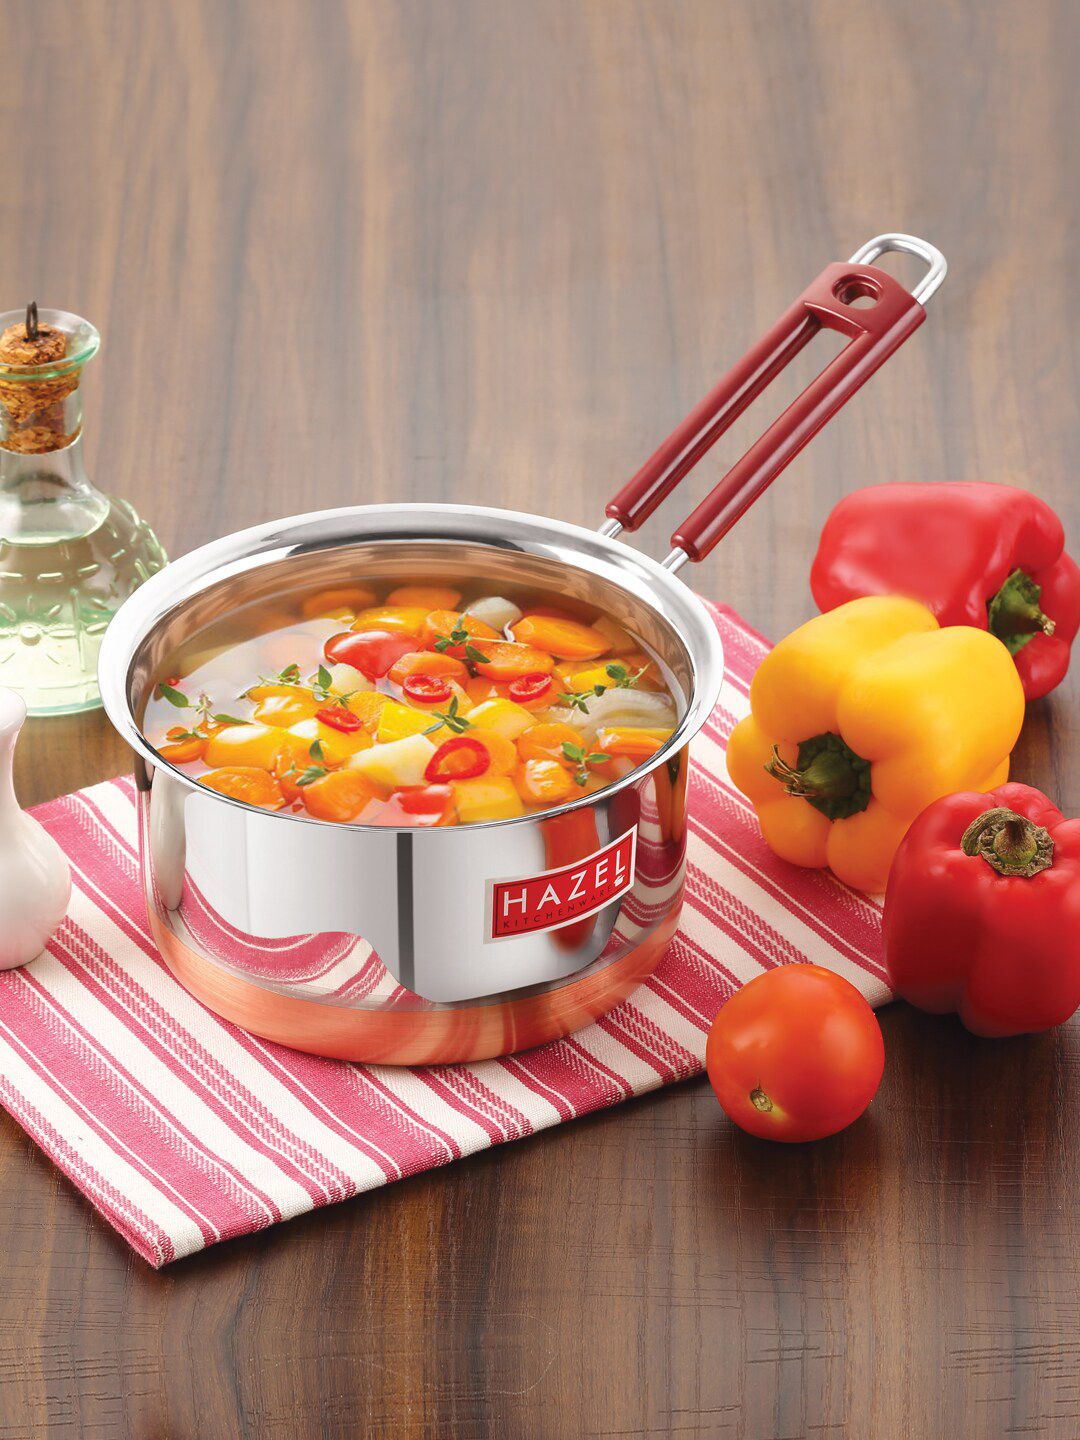 HAZEL Silver-Toned Solid Stainless Steel Sauce Pan Price in India